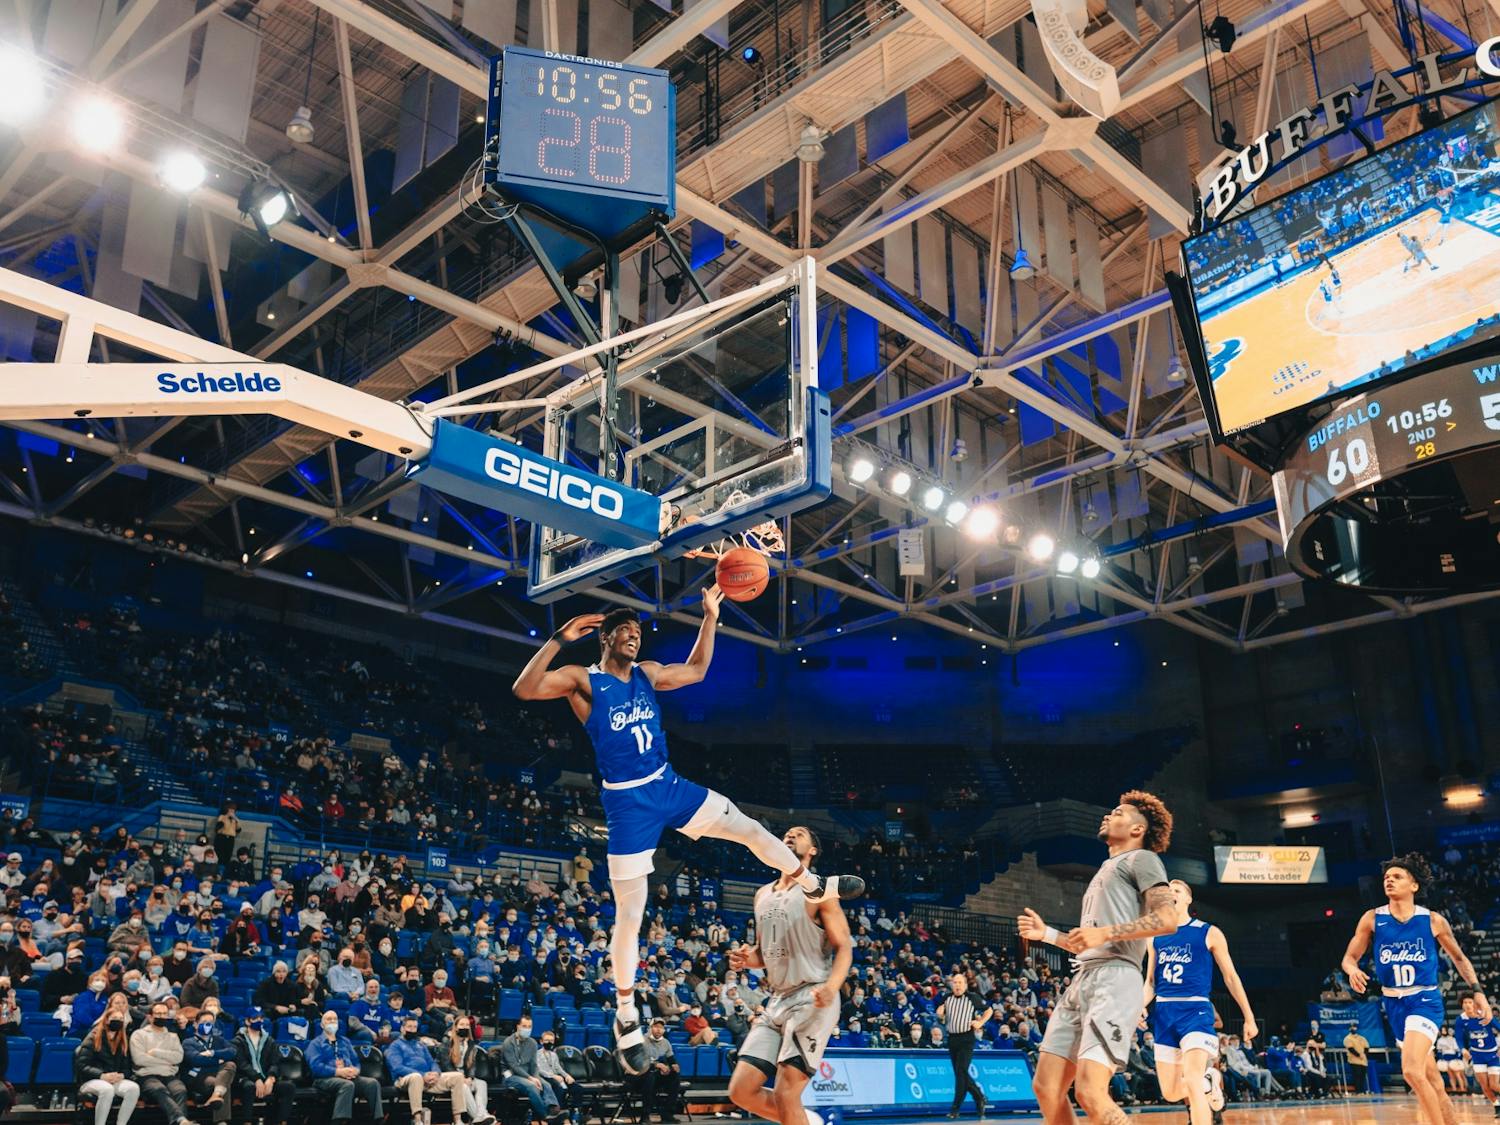 Senior forward Jeenathan Williams (11) dunks the ball in a recent game against Western Michigan at Alumni Arena.